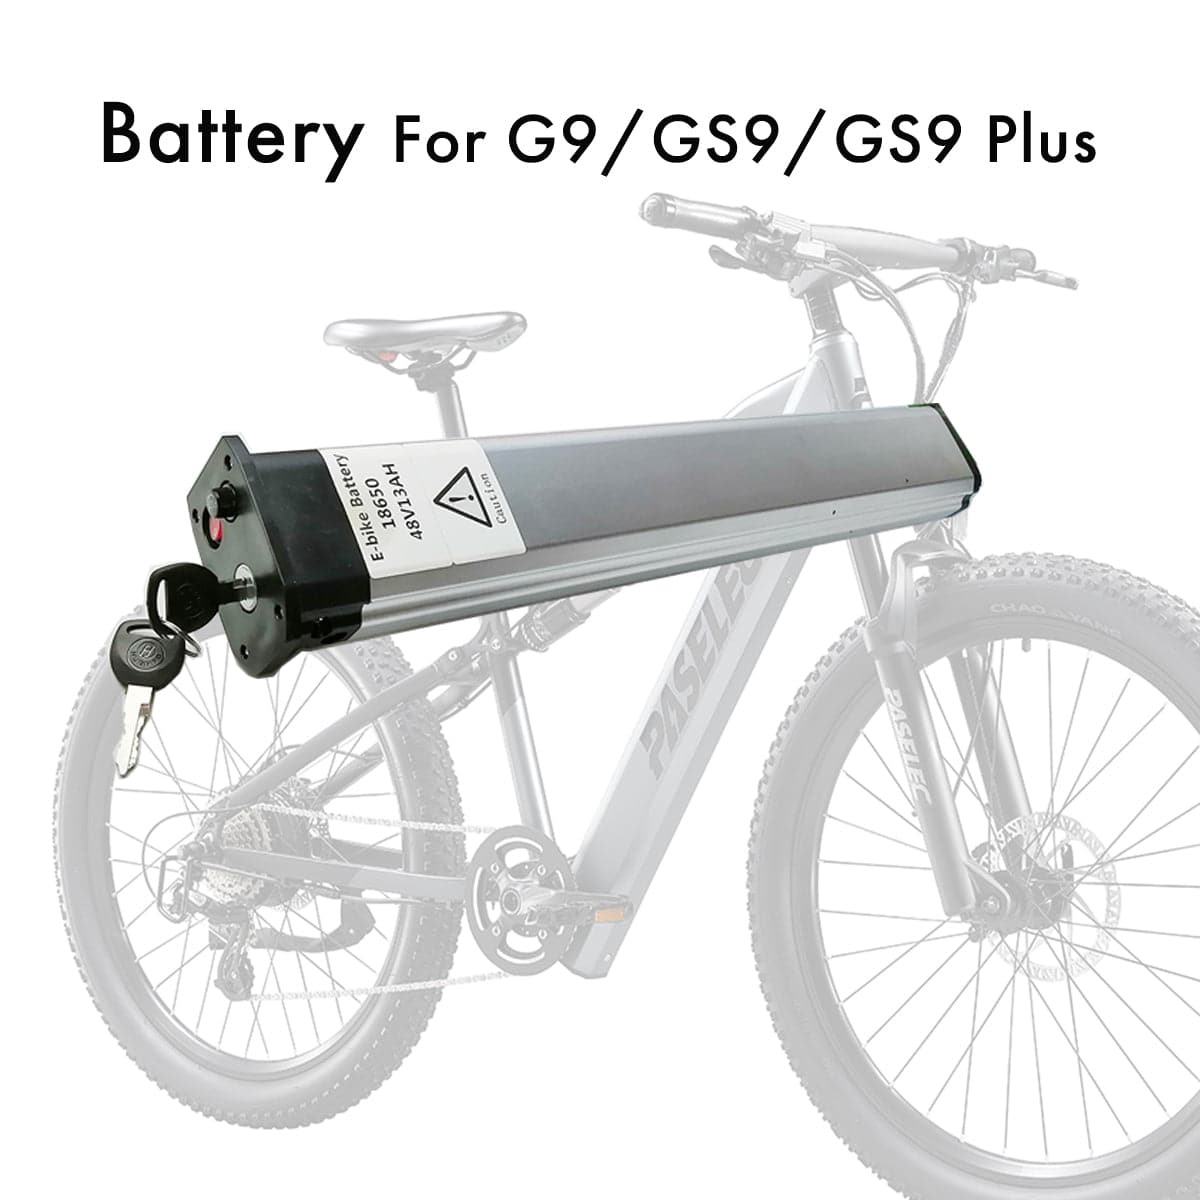 G9 GS9 GS9Plus Battery, 48V 13AH with 8 Protection,Lithium Batteries for Electric Bike